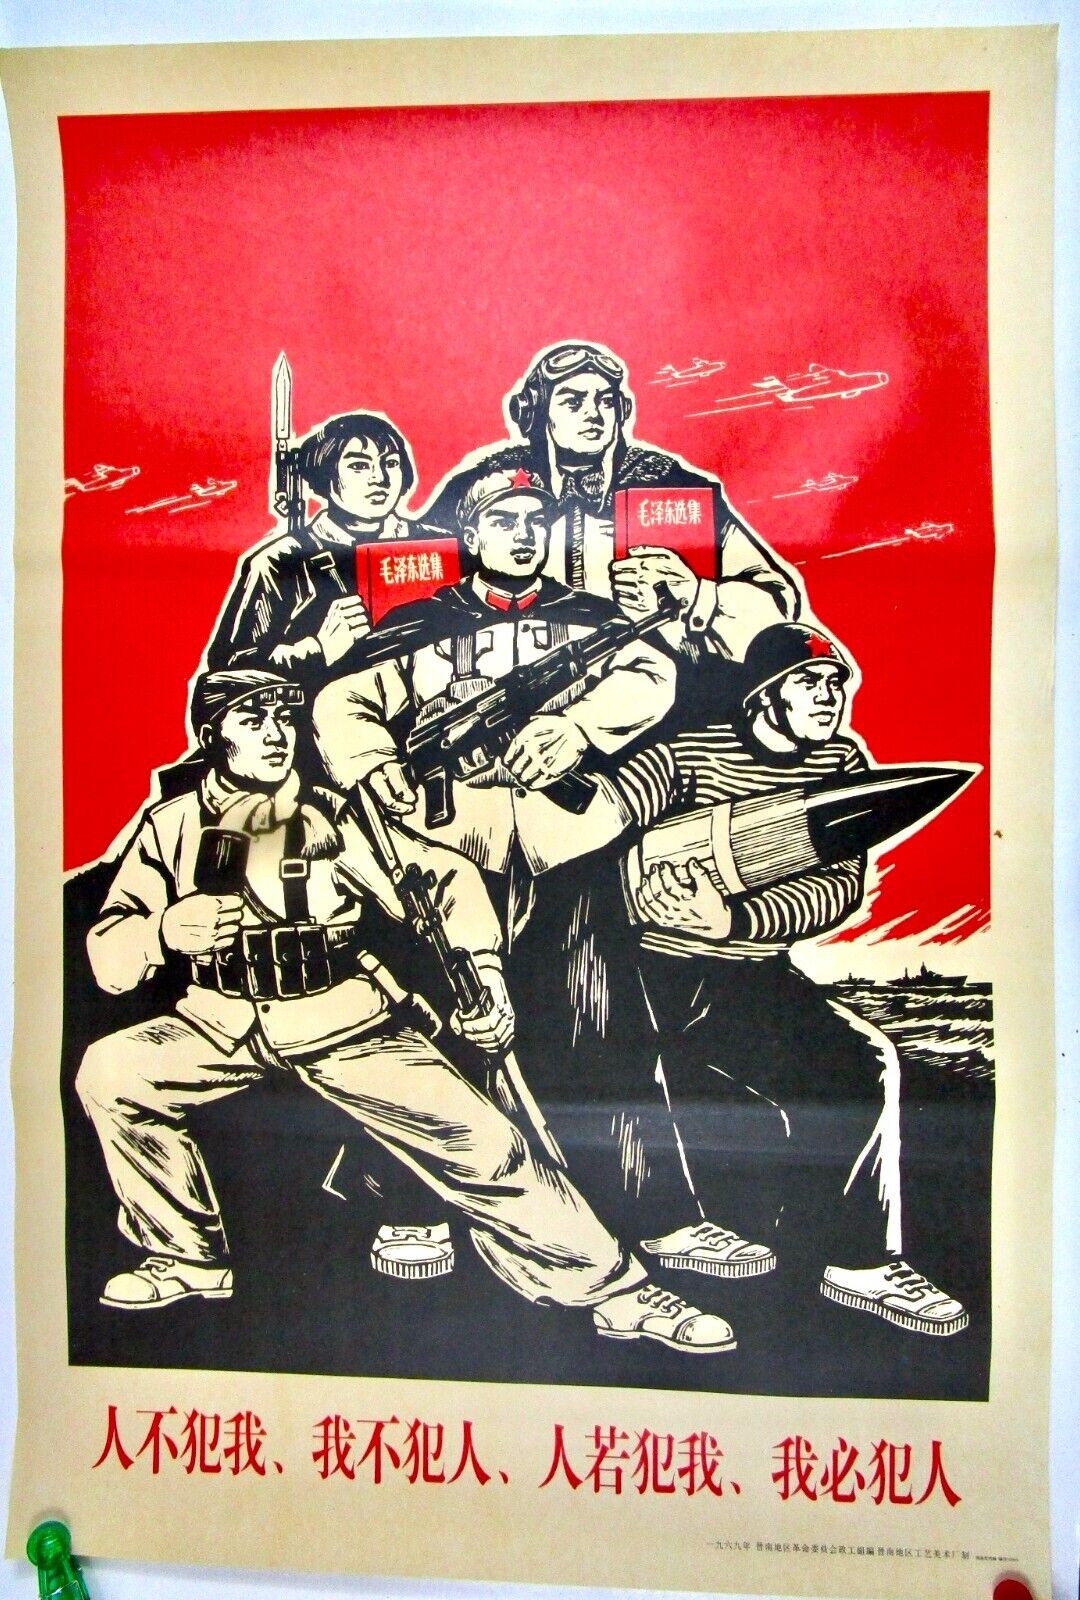 Large Communist China Poster of Workers Holding Guns and Mao’s Sayings, Number 4